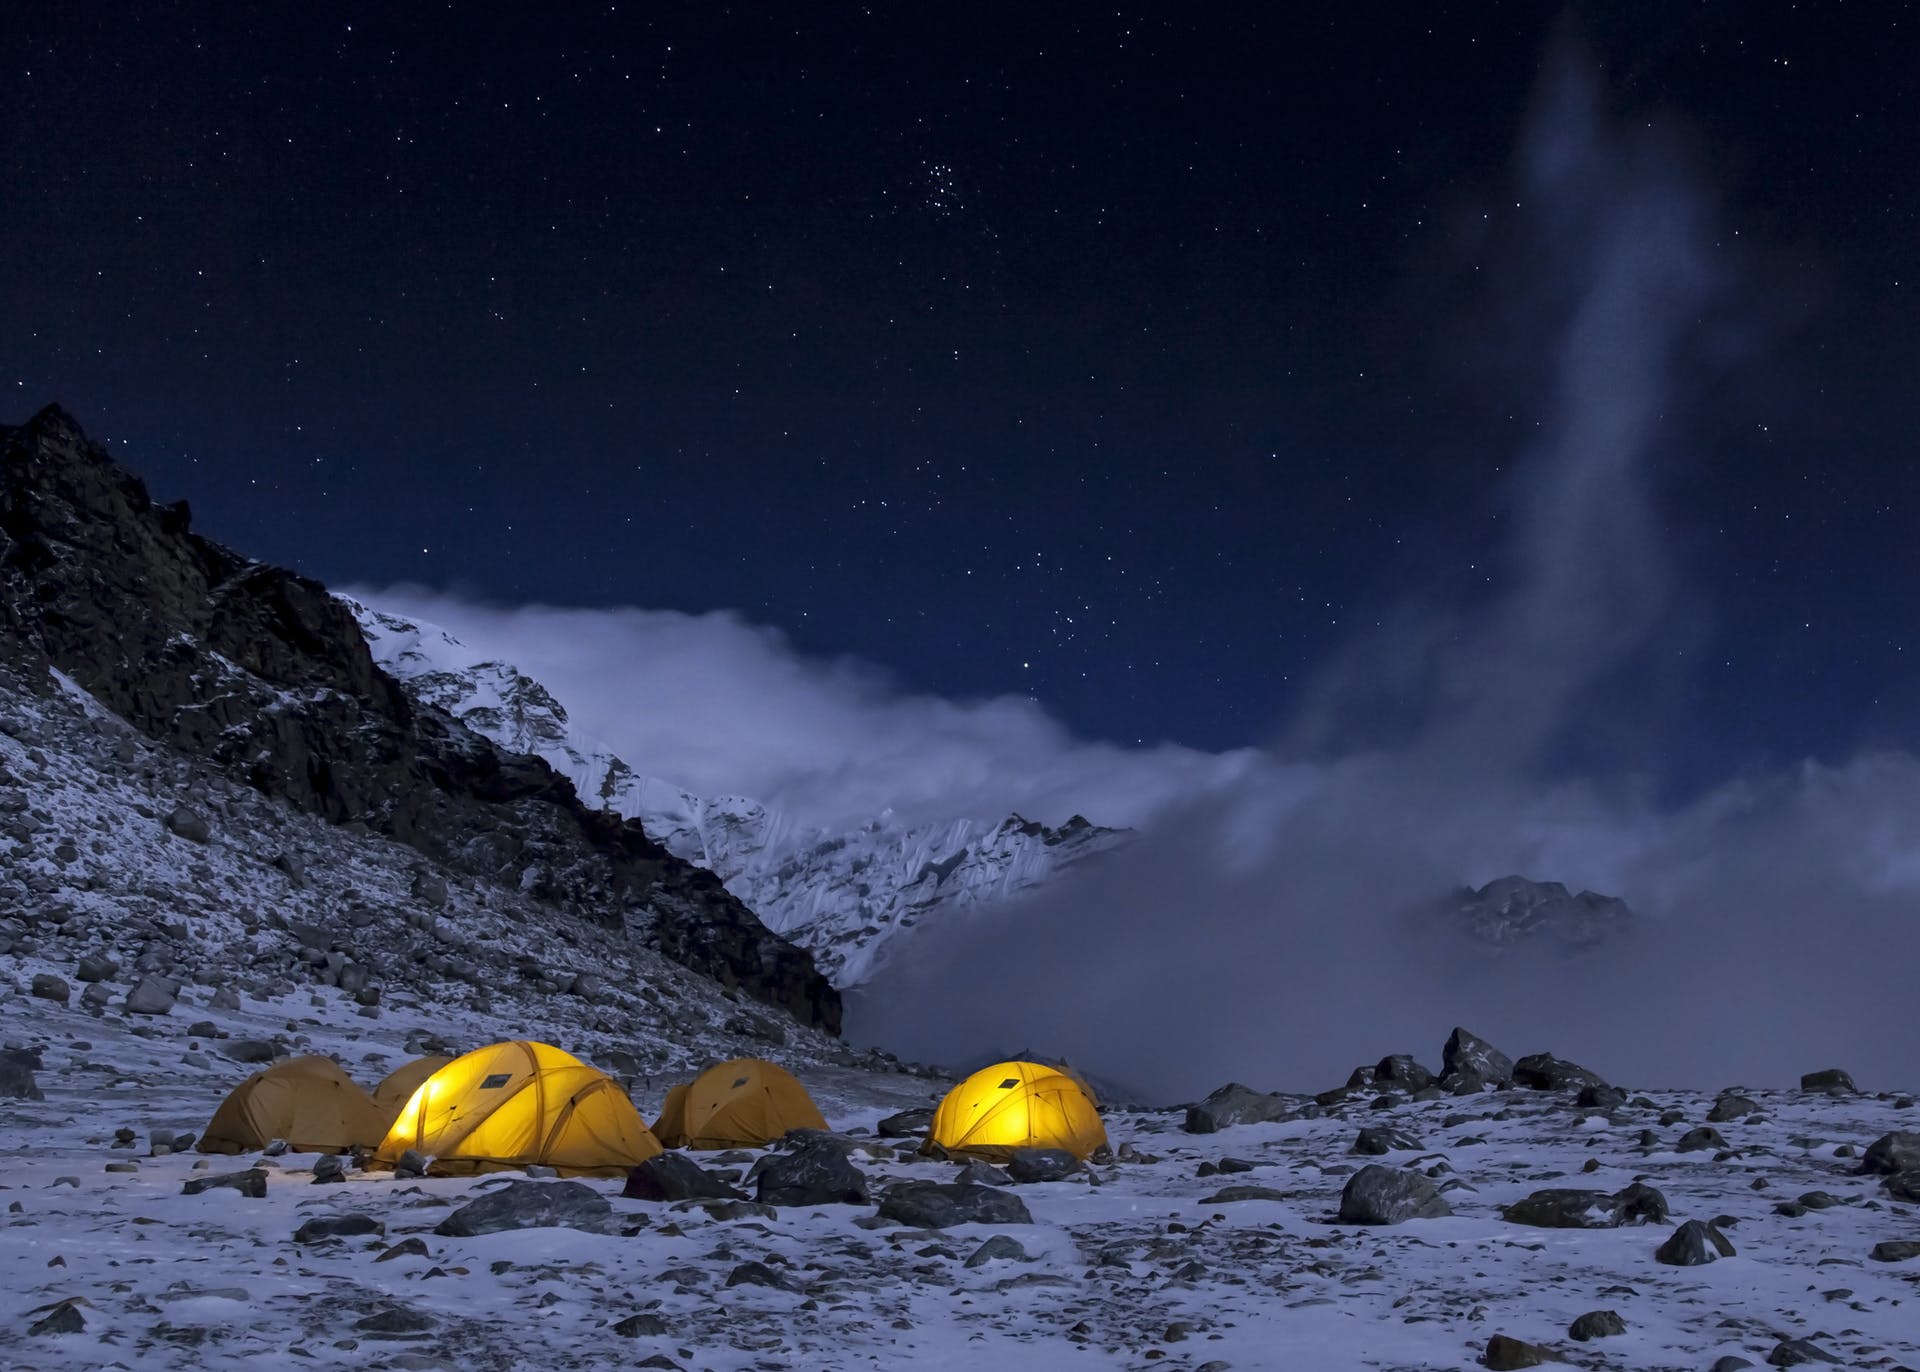 Illuminated tents surrounded by snow and ice, a wild campsite on Yala Peak in Nepal.